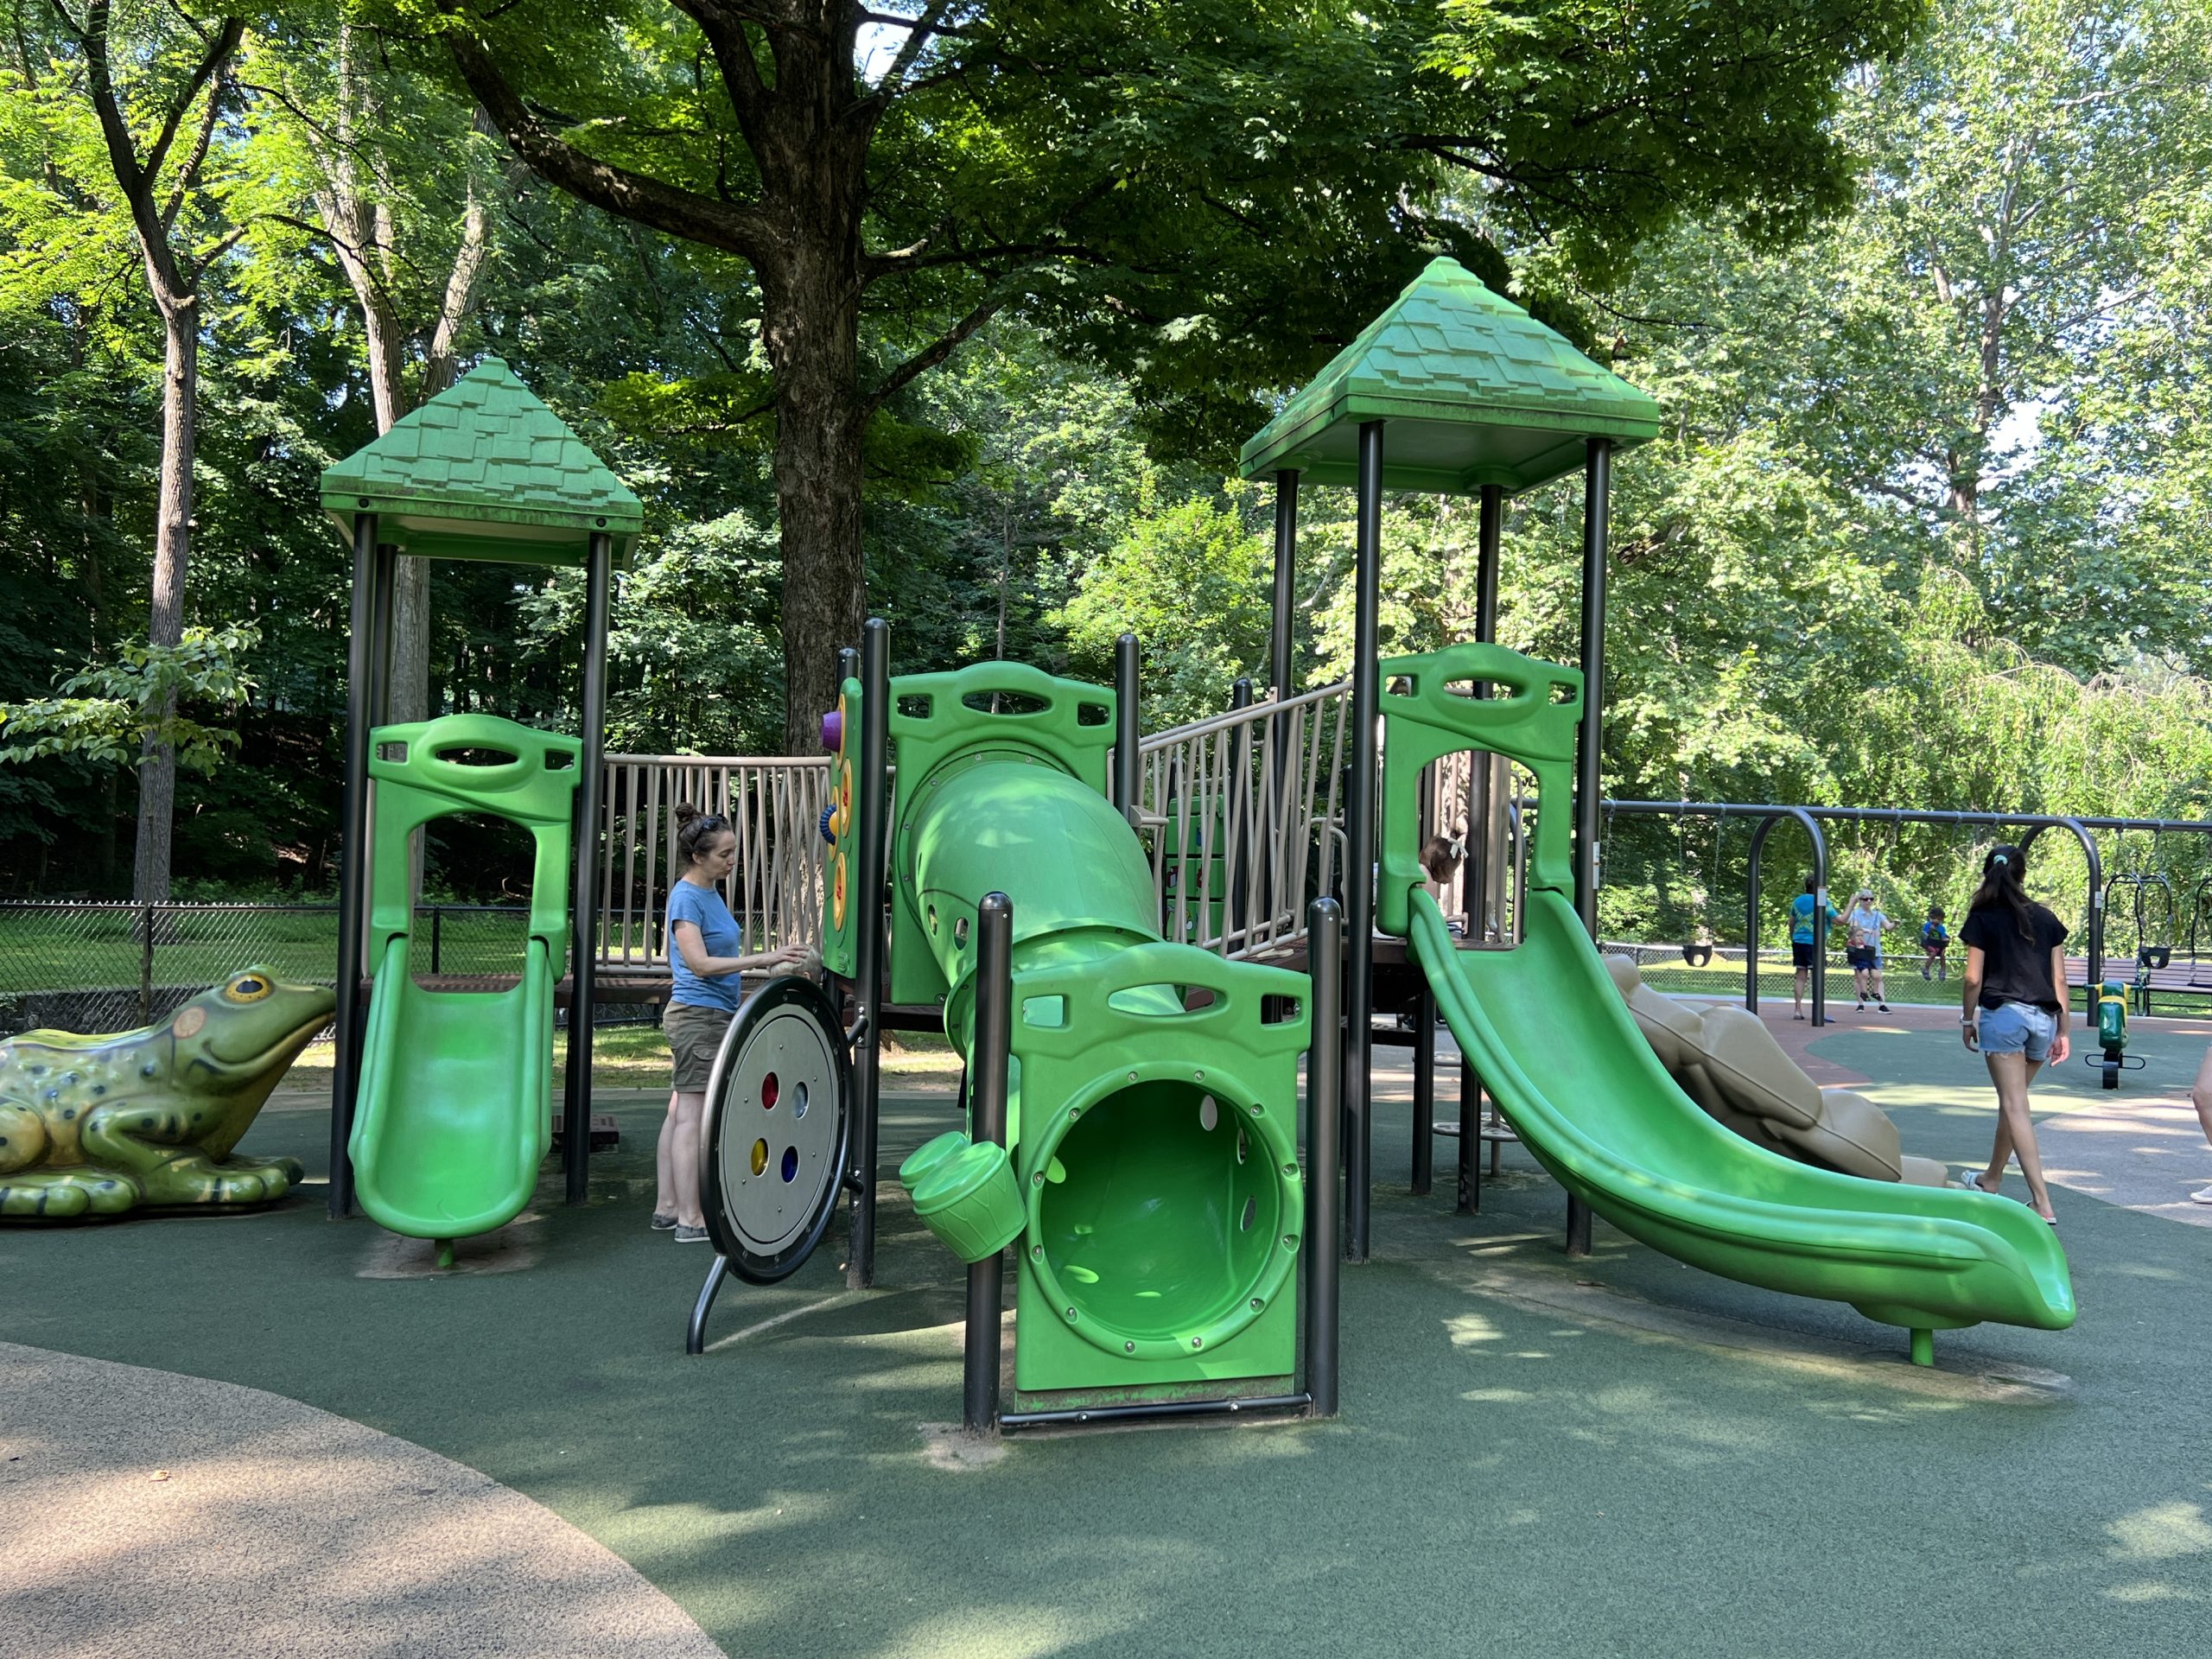 Grover Cleveland Playgrounds in Caldwell NJ - Medium Playground Structure - WIDE all 3 slides